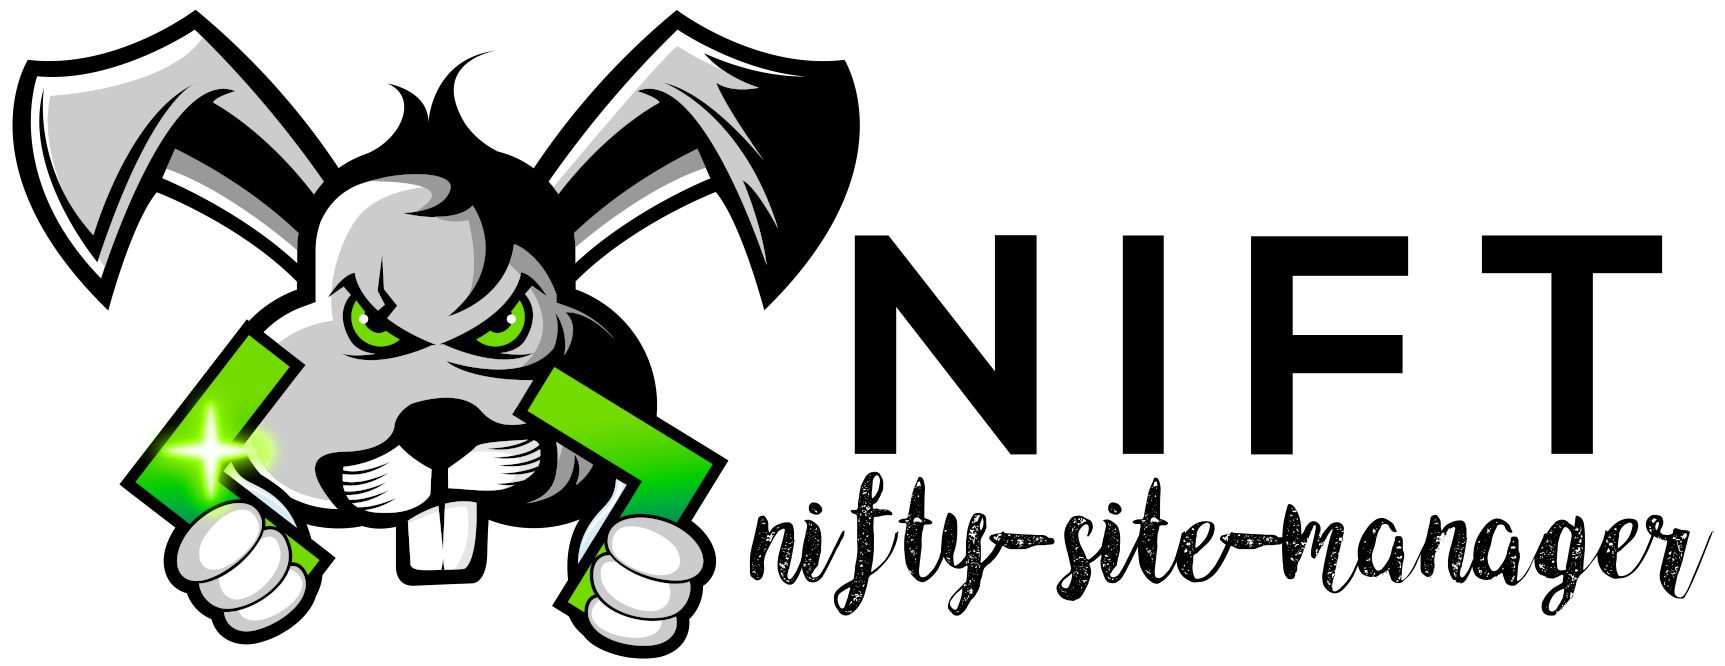 Nift bunny mascot with black text